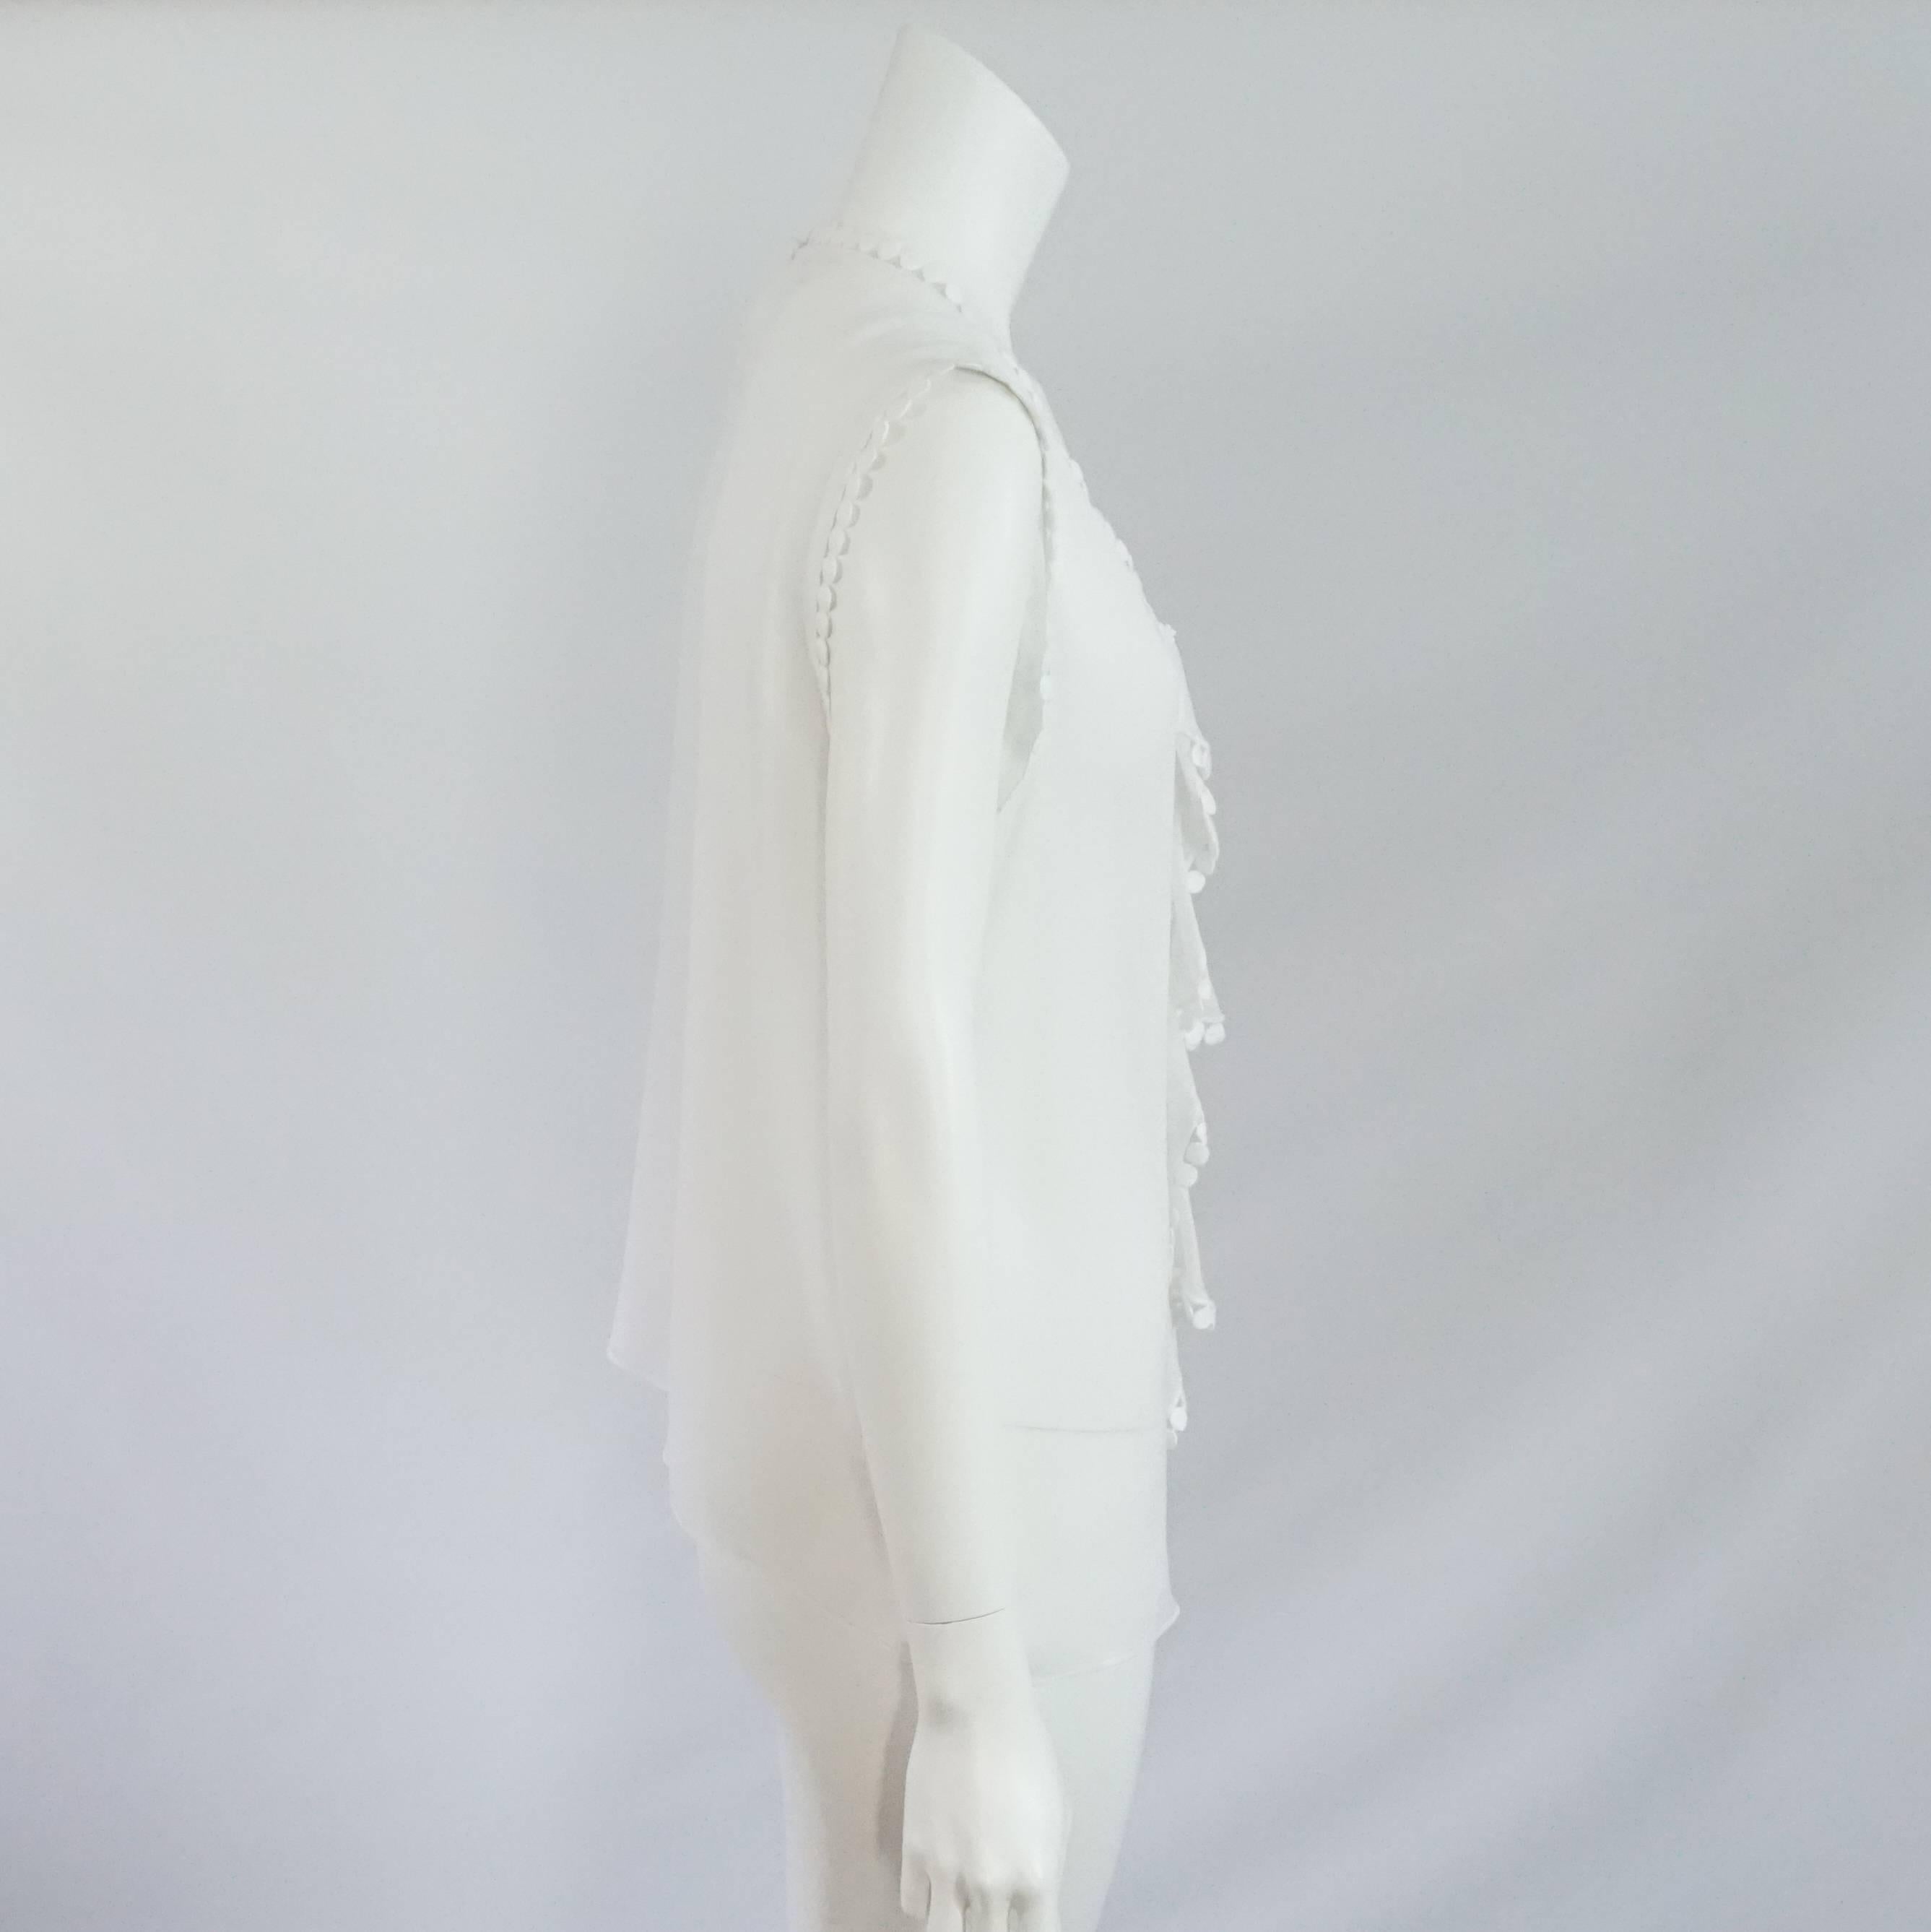 Oscar de la Renta White Silk Chiffon & Lace Top - 12. This gorgeous top has a very fresh and elegant look. It features a front ruffle detailing, lace trim, and a keyhole opening on the back. It is in excellent condition with 2 very light marks by